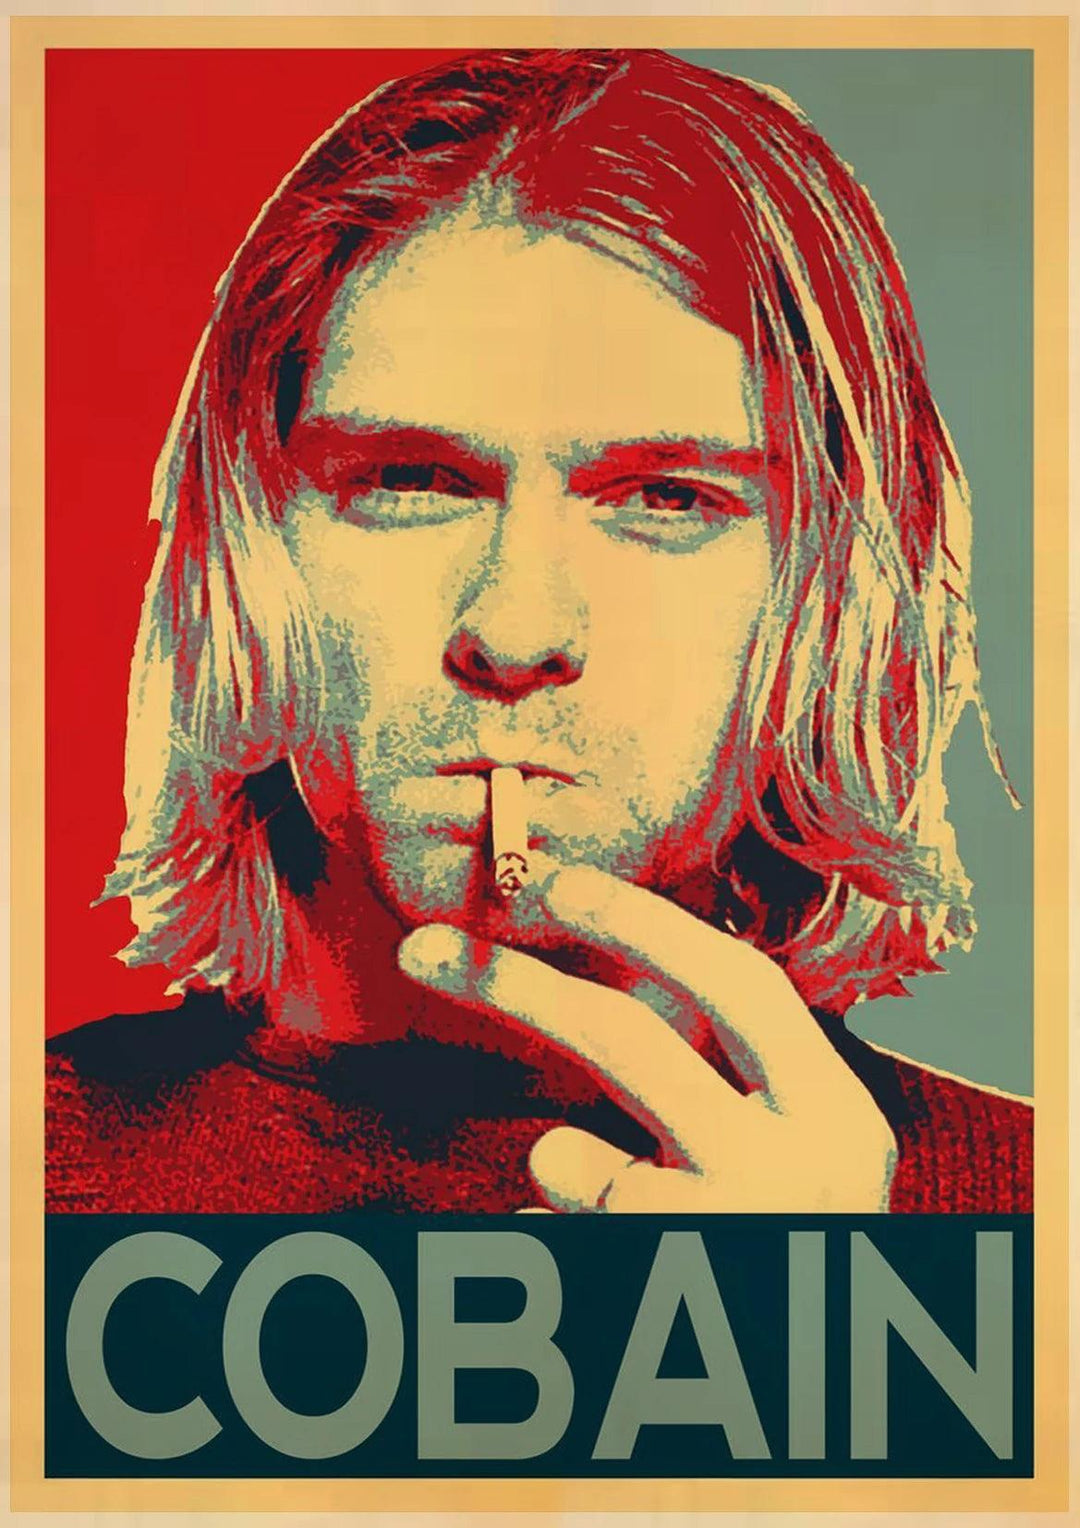 Singer Kurt Cobain Posters Rock and Roll Music Retro Kraft Paper Sticker DIY Vintage Room Bar Cafe Decor Gift Art Wall Paintings - Brand My Case